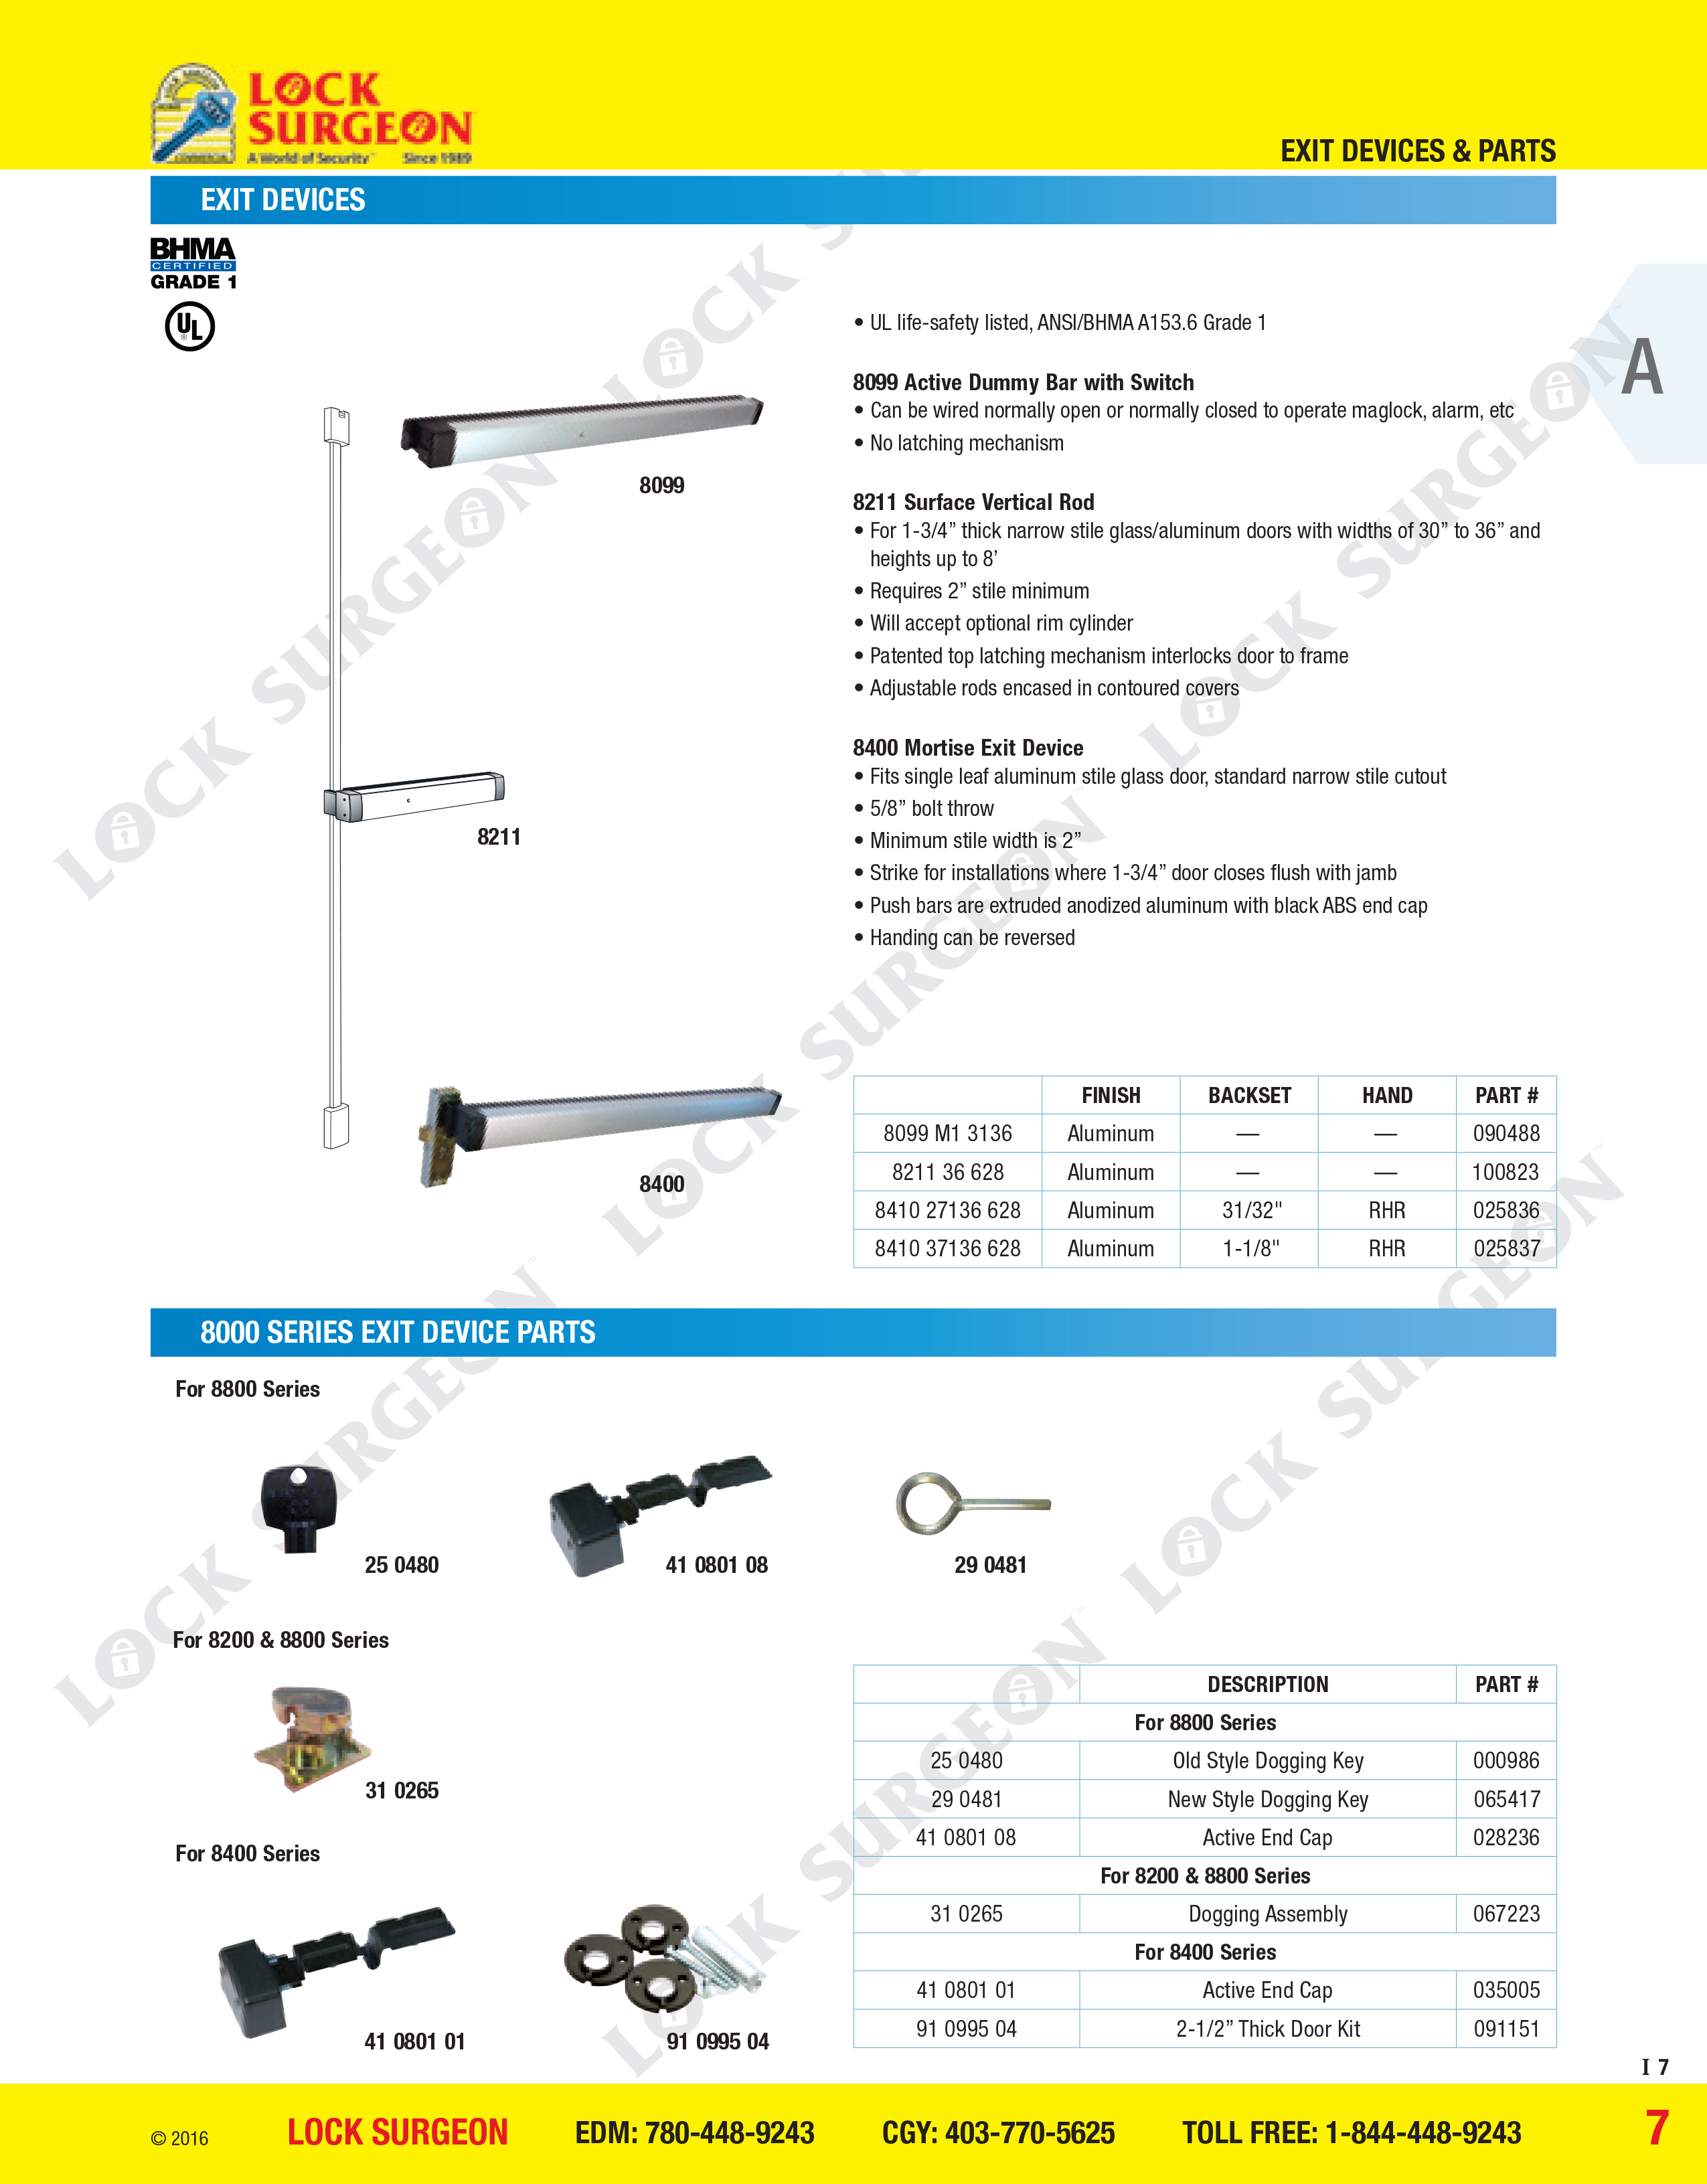 Exit devices and 8000 Series exit device parts